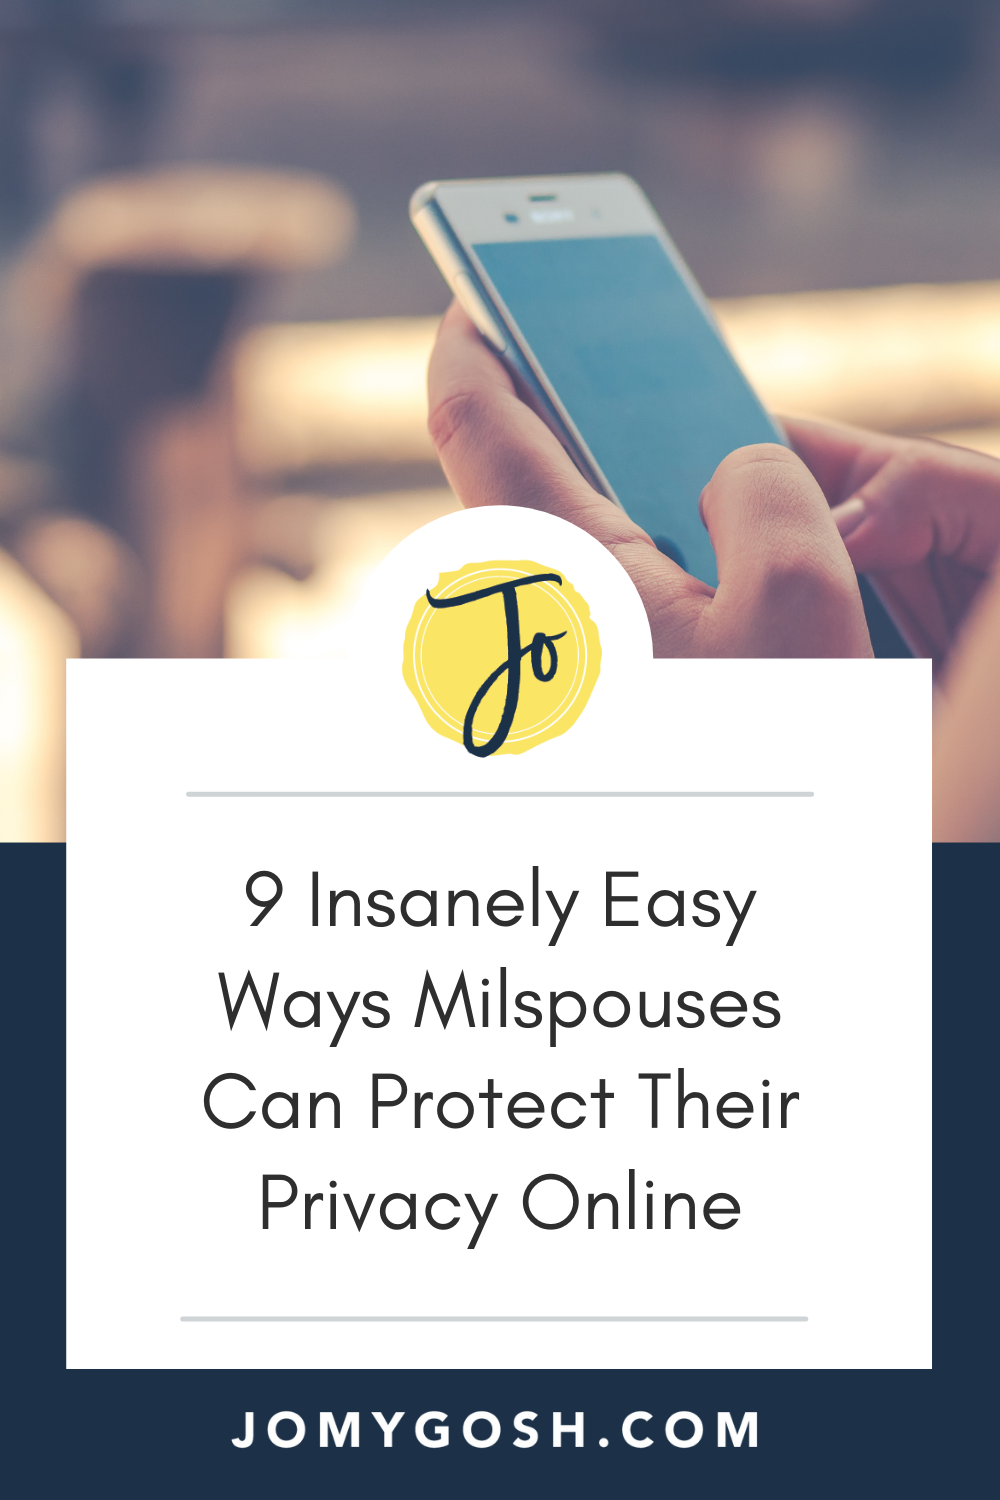 Take 20 minutes and lock down your online presence. Do it. Do it now. #military #militaryfamily #militaryspouse #milspouse #milso #milspo #milsos #milspos #privacy #online #technology